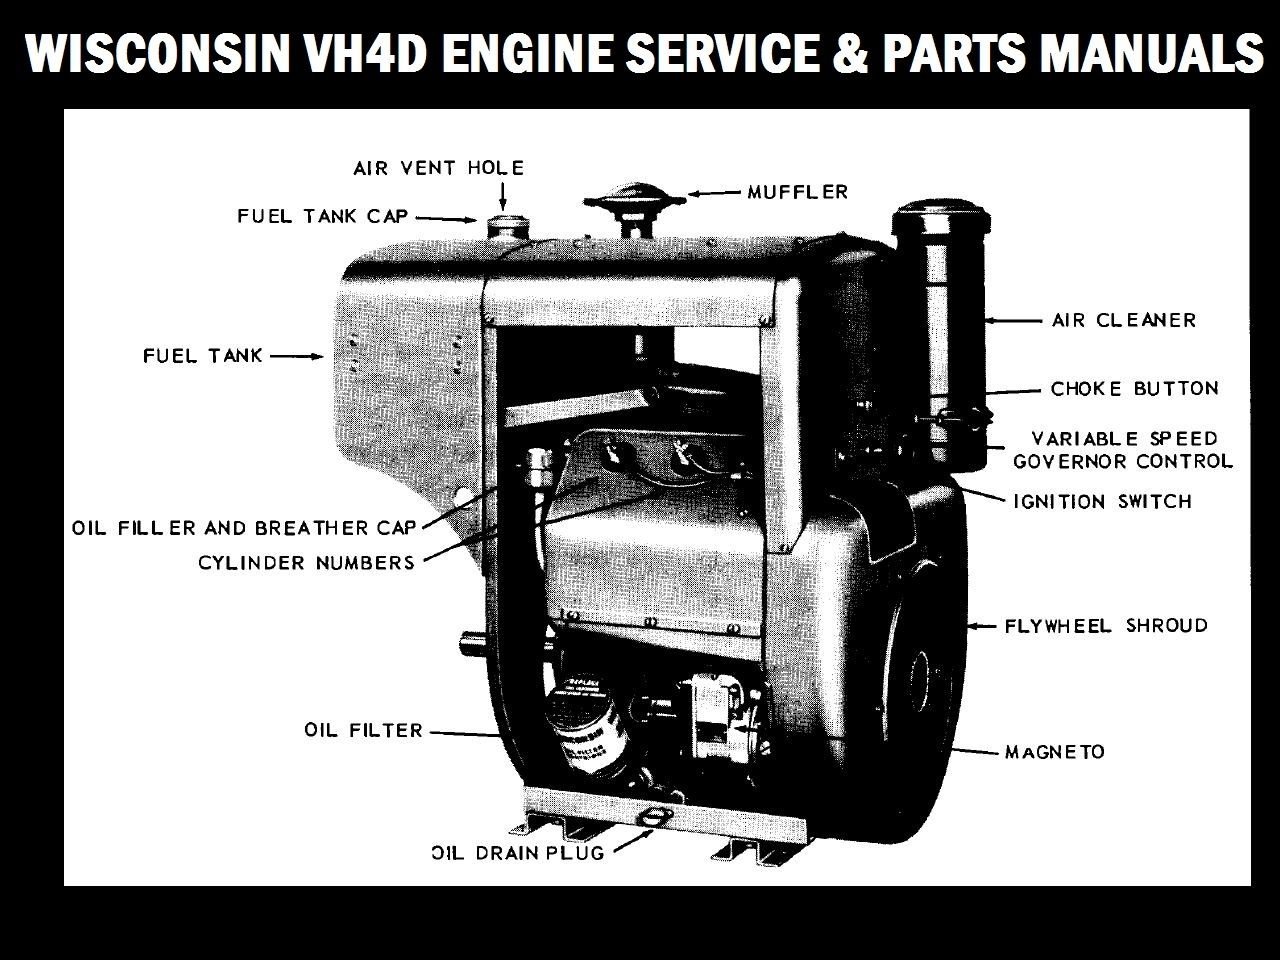 WISCONSIN VH4D 4cyl ENGINE SERVICE and PARTS MANUALs for VH 4D Tractor Repa...